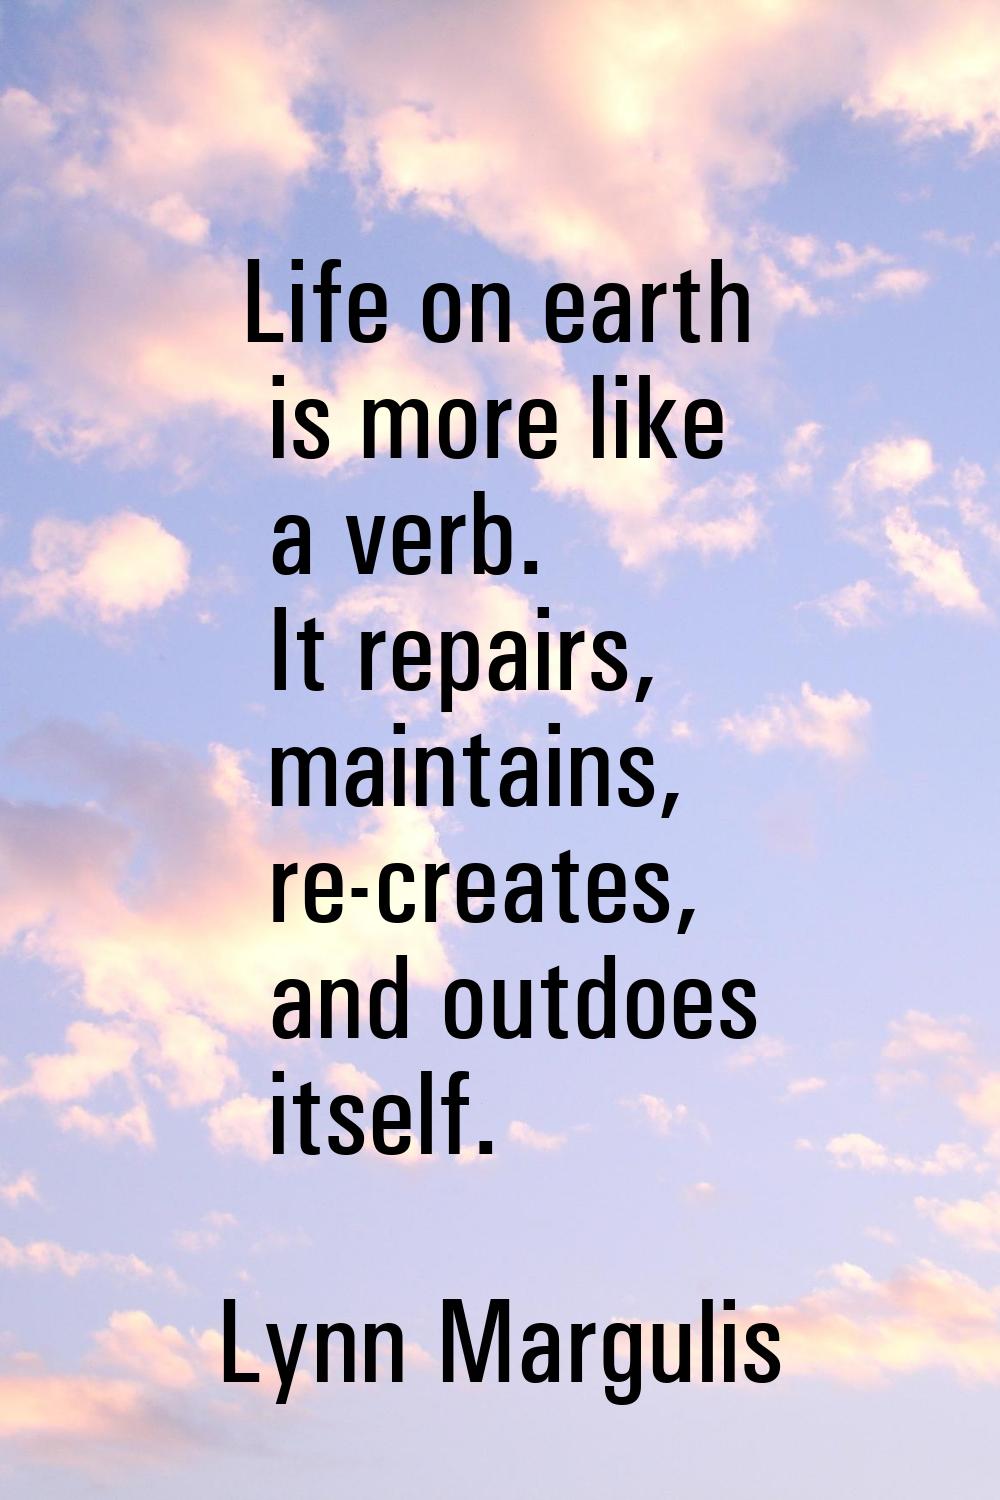 Life on earth is more like a verb. It repairs, maintains, re-creates, and outdoes itself.